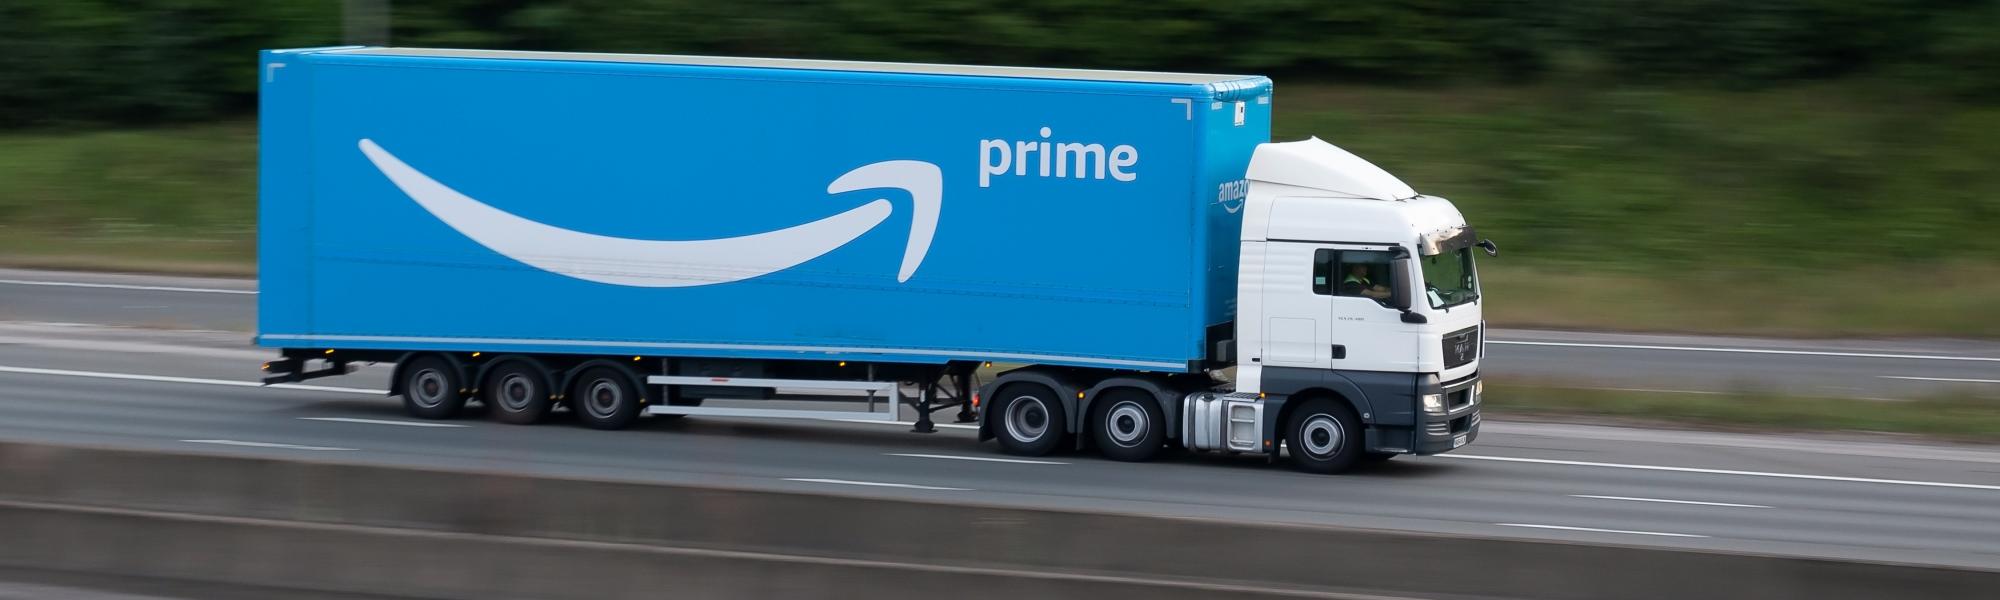 Amazon joins IRU to boost collaboration on global road transport challenges